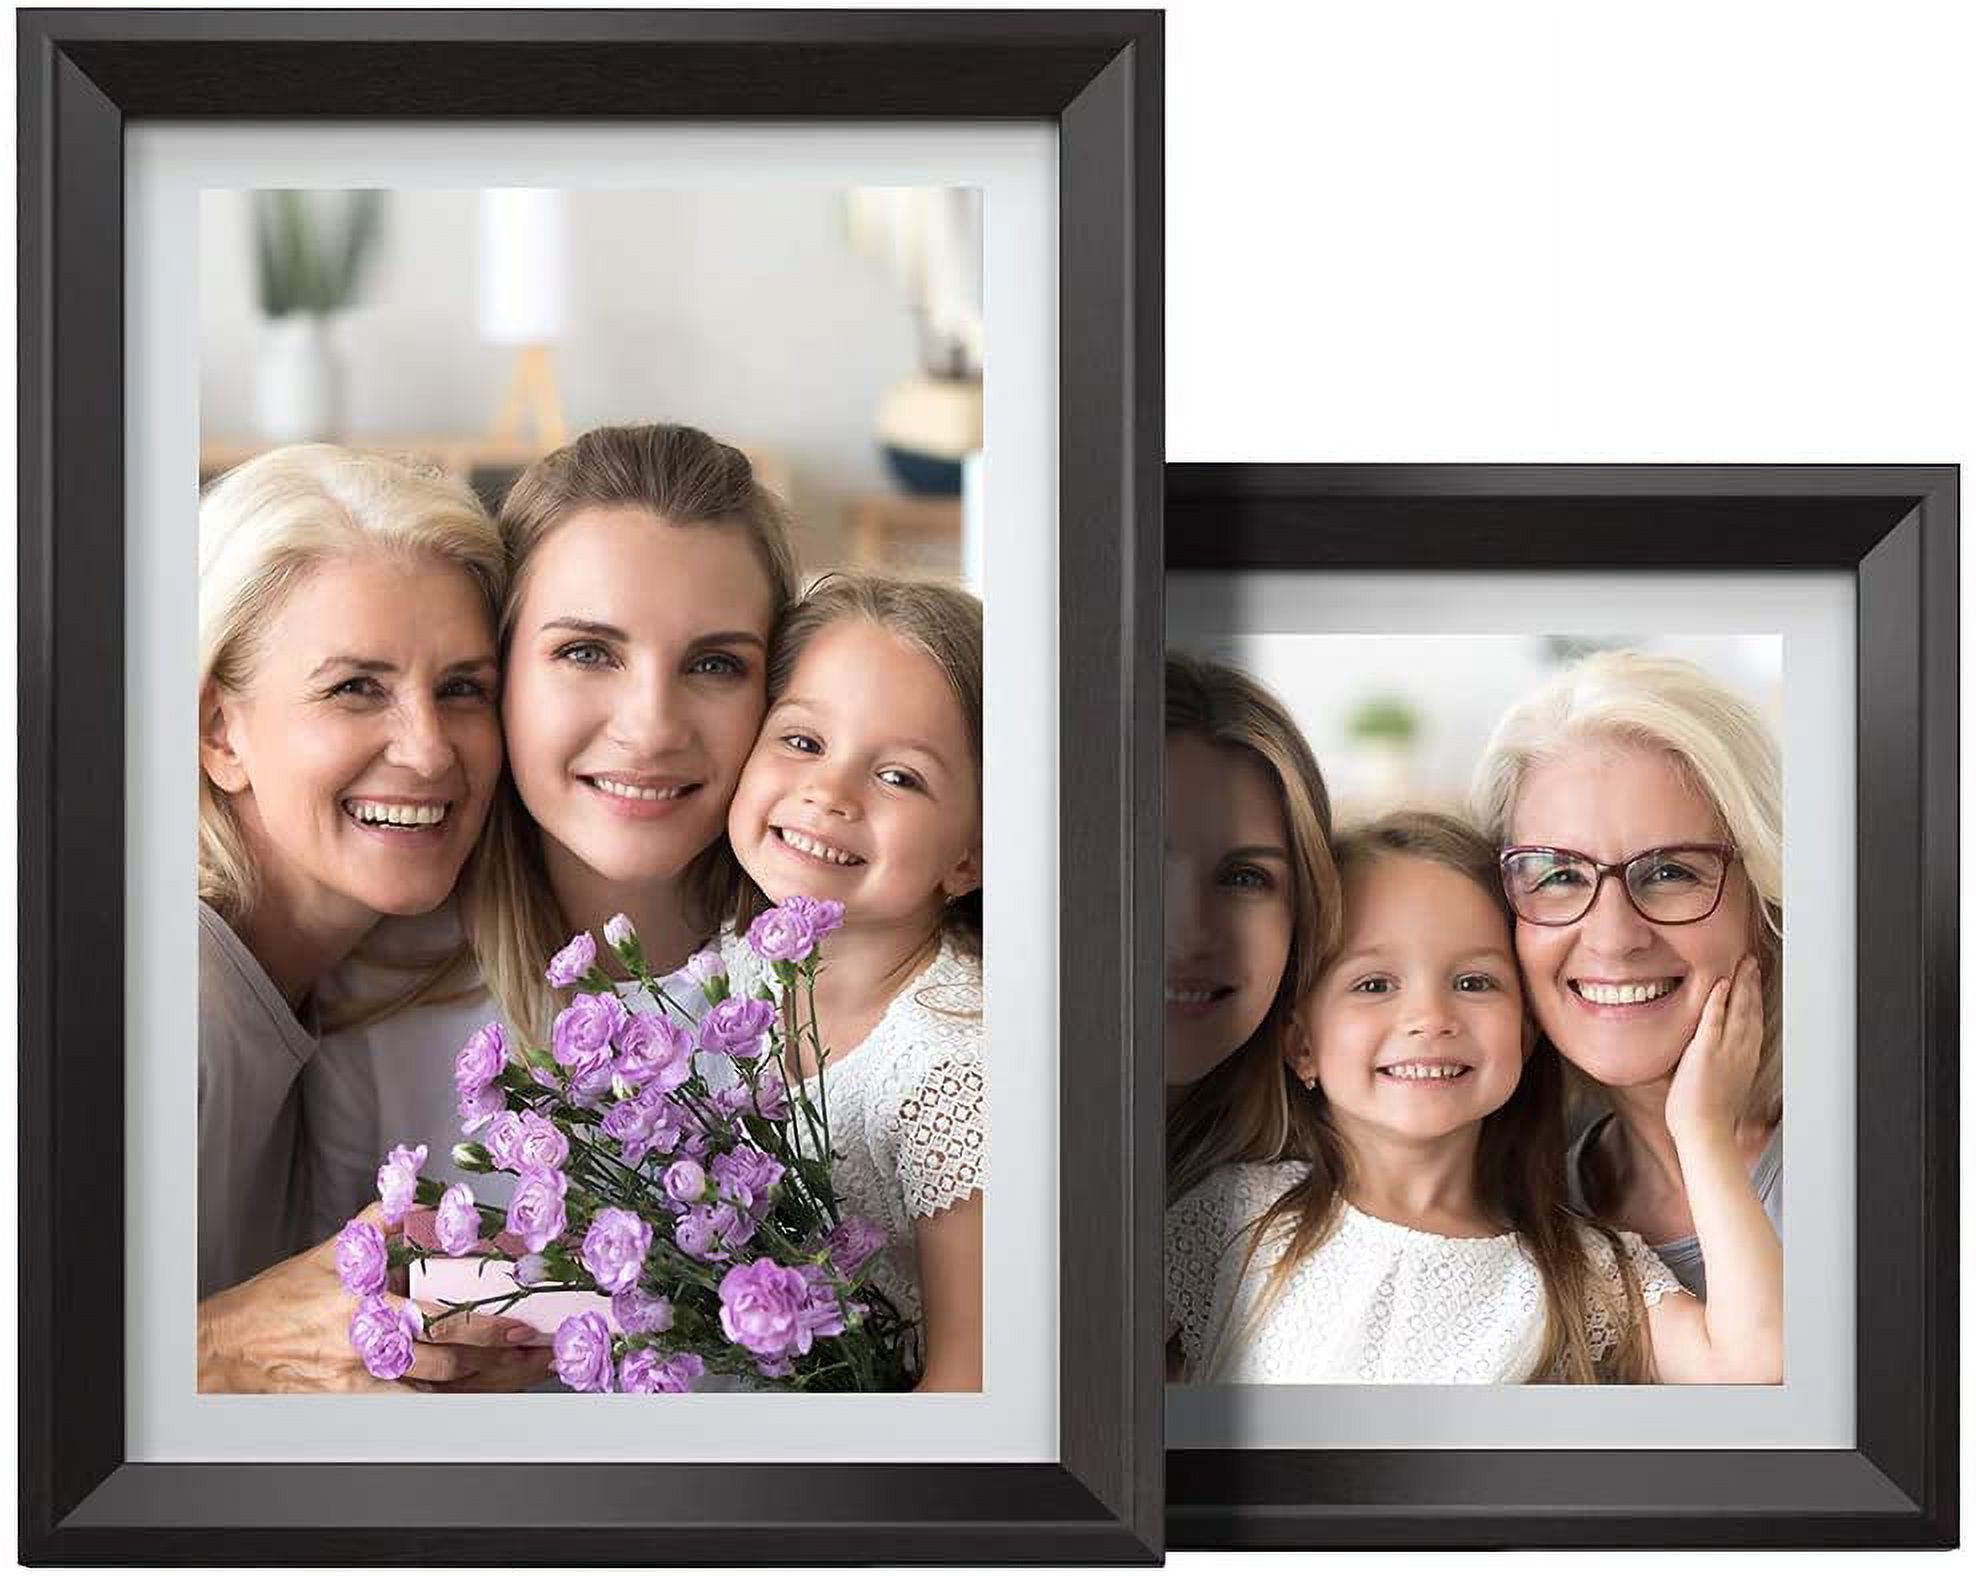 Dragon Touch Digital Picture Frame WiFi 10 inch IPS Touch Screen HD Display, 16GB Storage, Auto-Rotate, Share Photos via App, Email, Cloud - Classic 10 - image 4 of 8